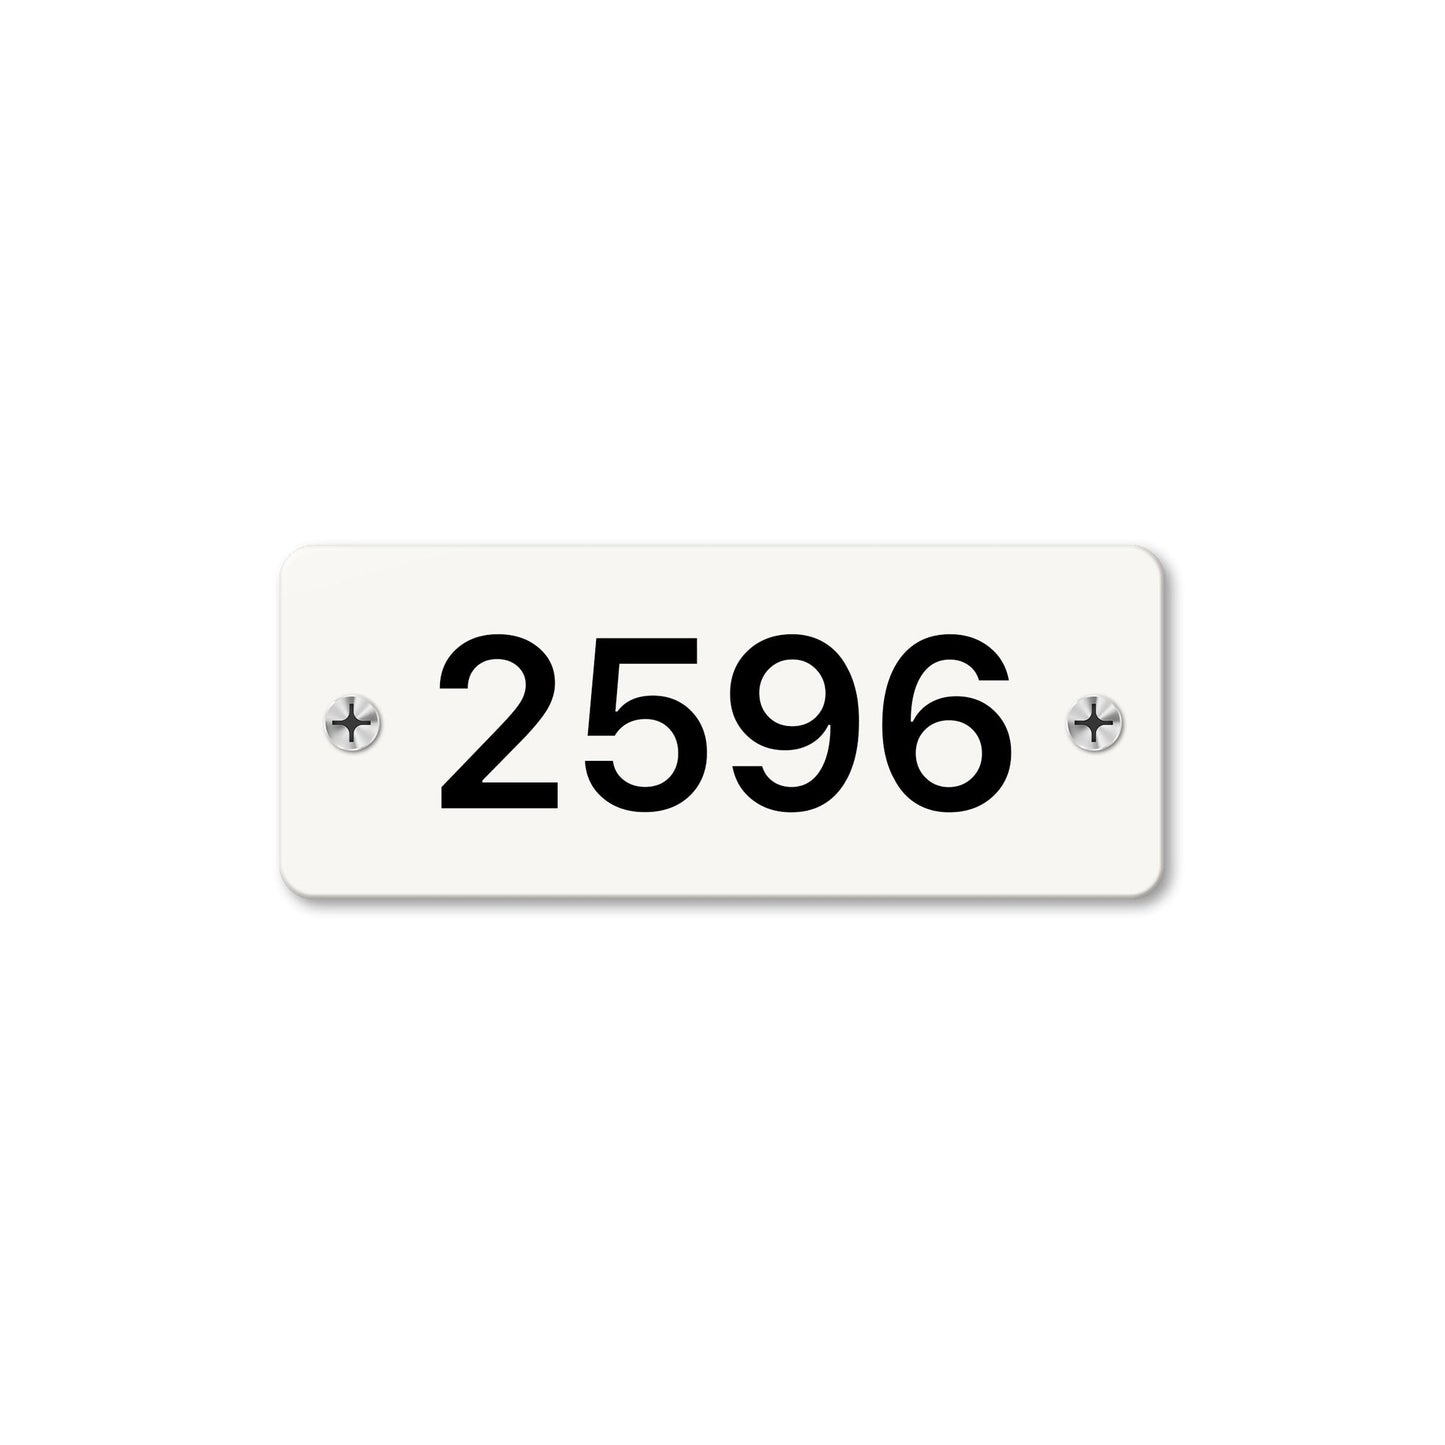 Numeral 2596